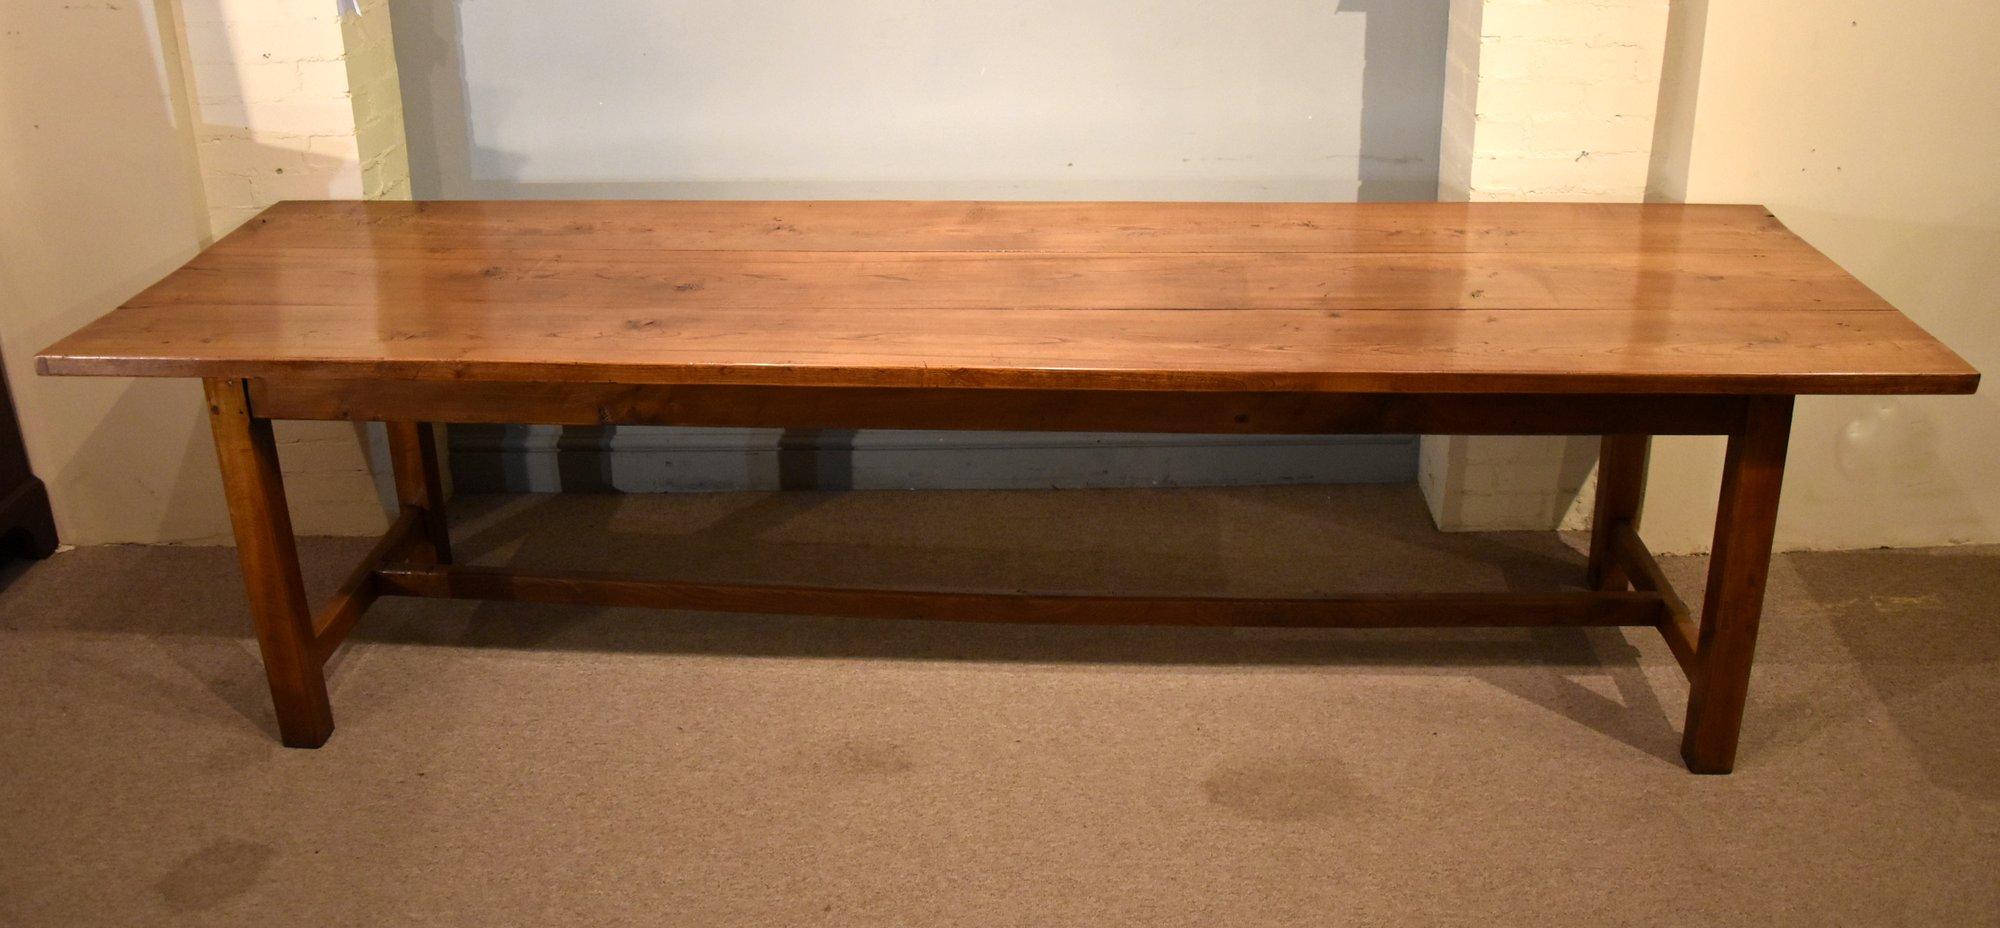 This beautiful and very sturdy 19th century French elm farmhouse table of large proportions boasts excellent golden colour and good patina. Its three plank and purely solid elm construction makes this a rare find. It has been restored by one of